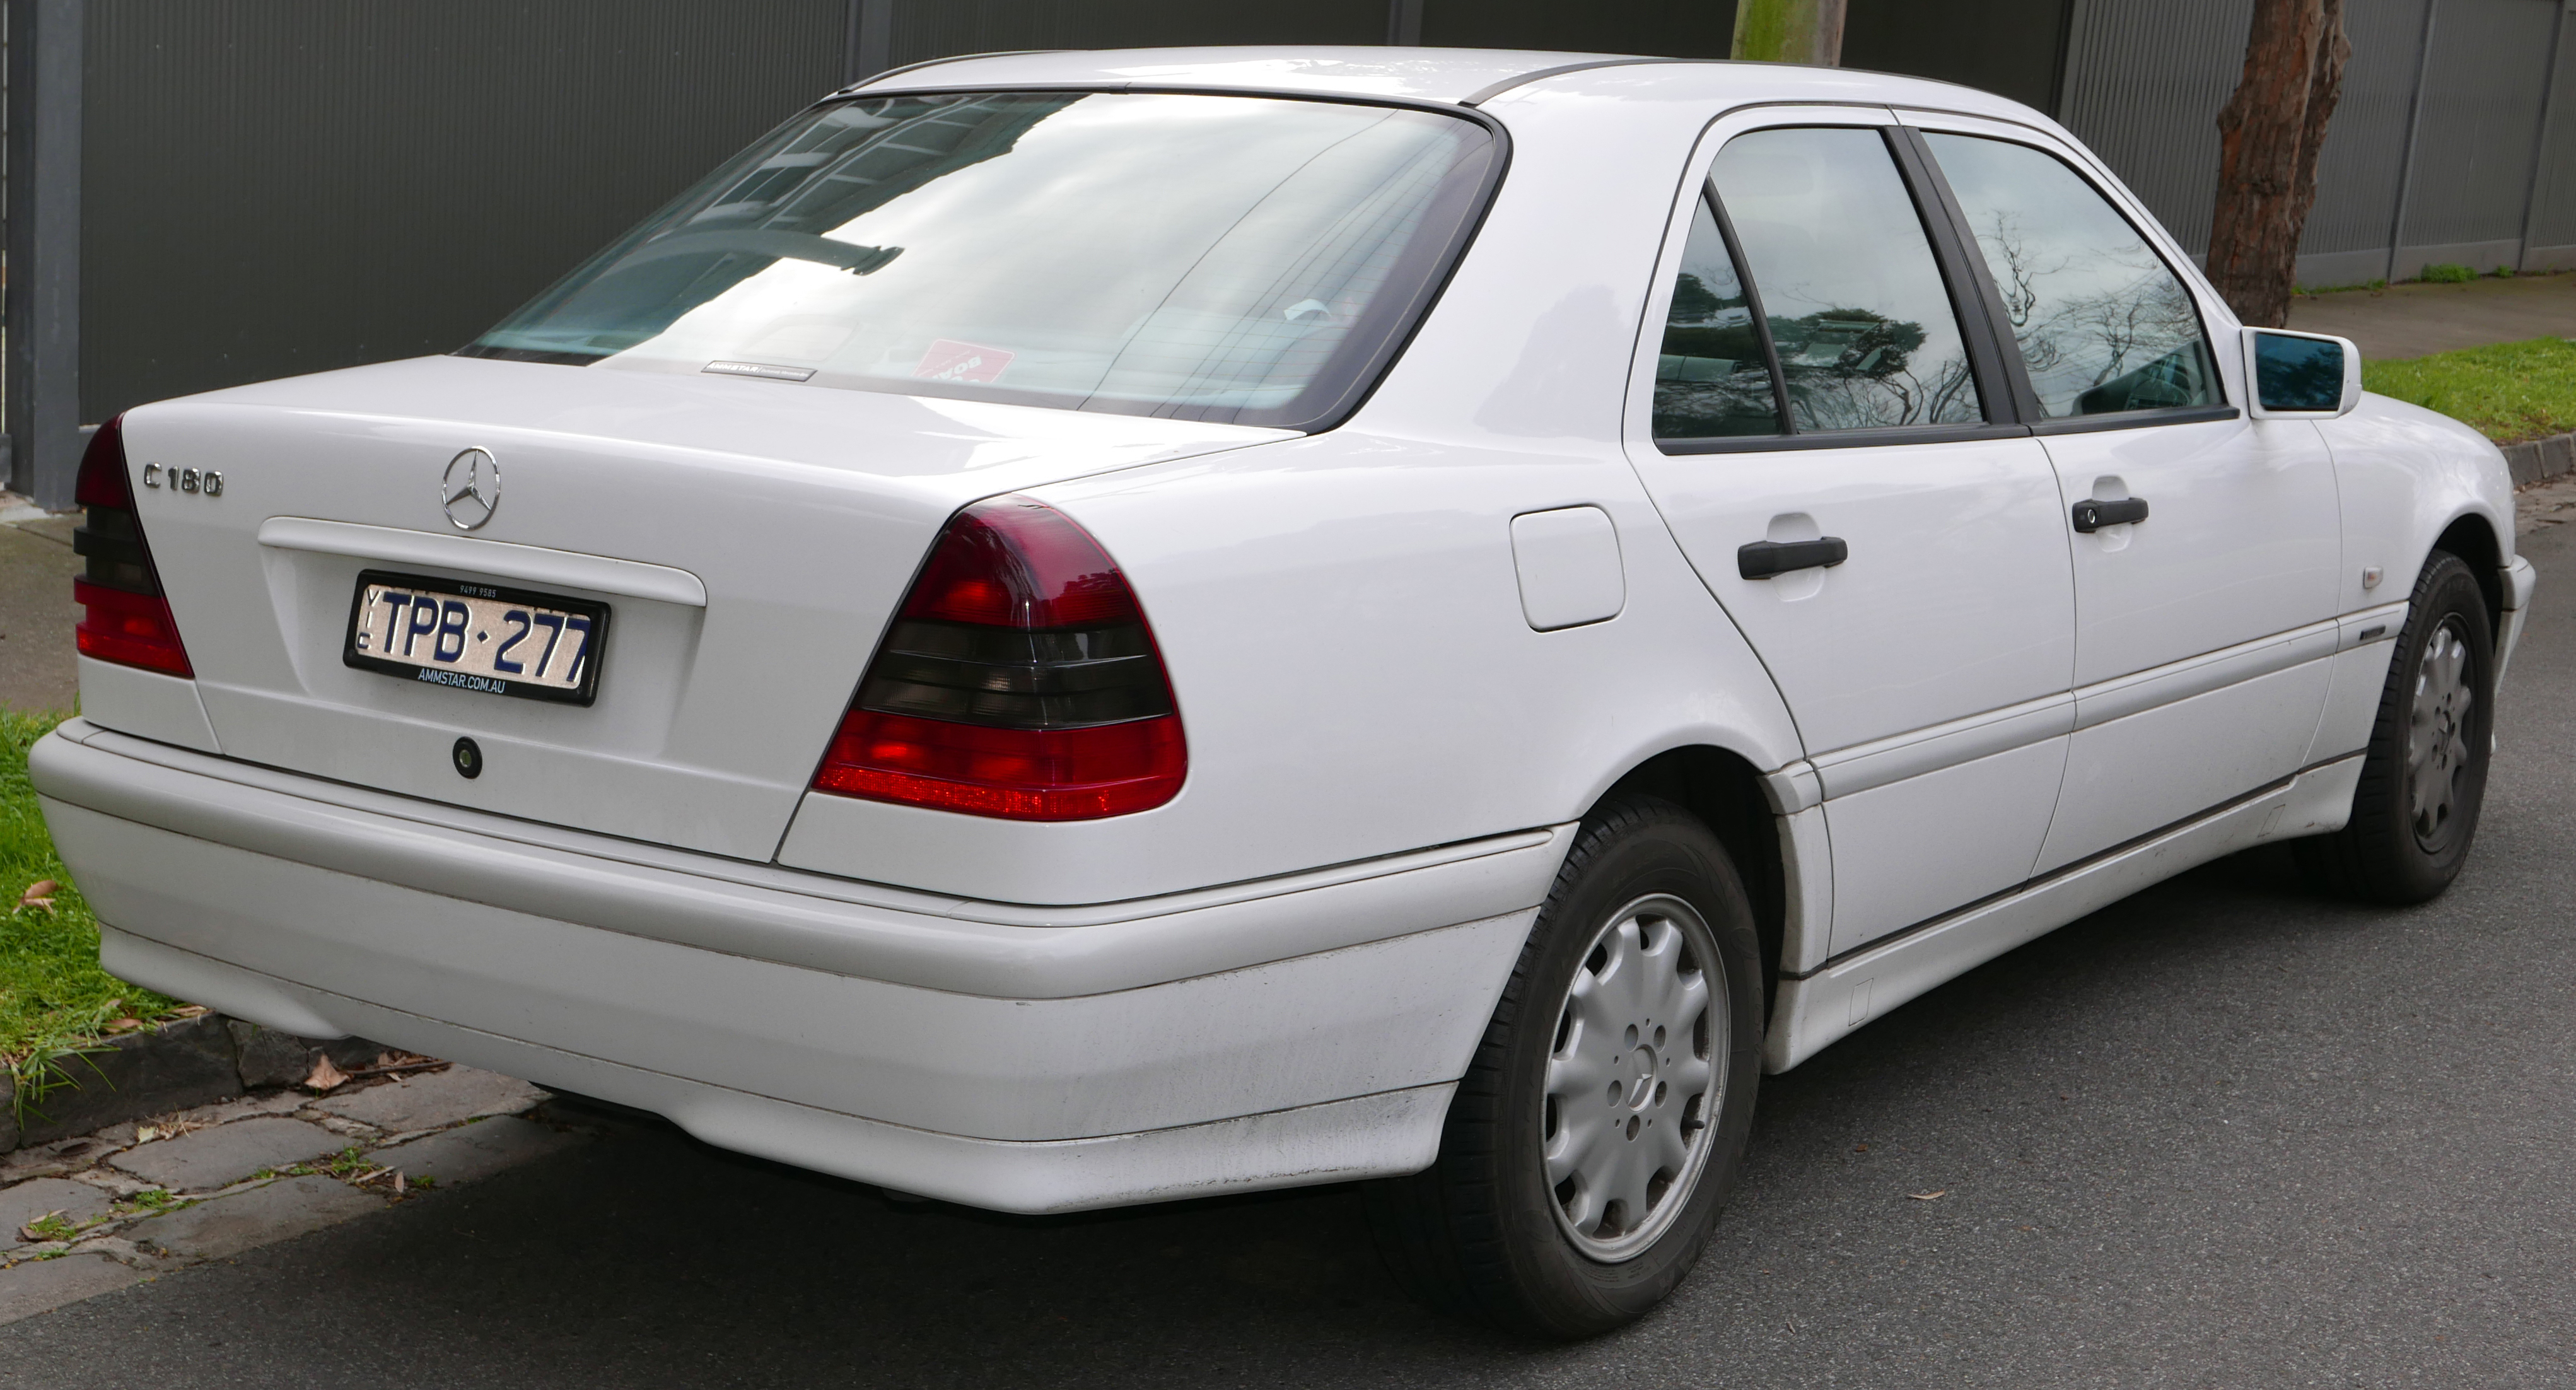 Mercedes Benz C Class W202: Most Up-to-Date Encyclopedia, News & Reviews